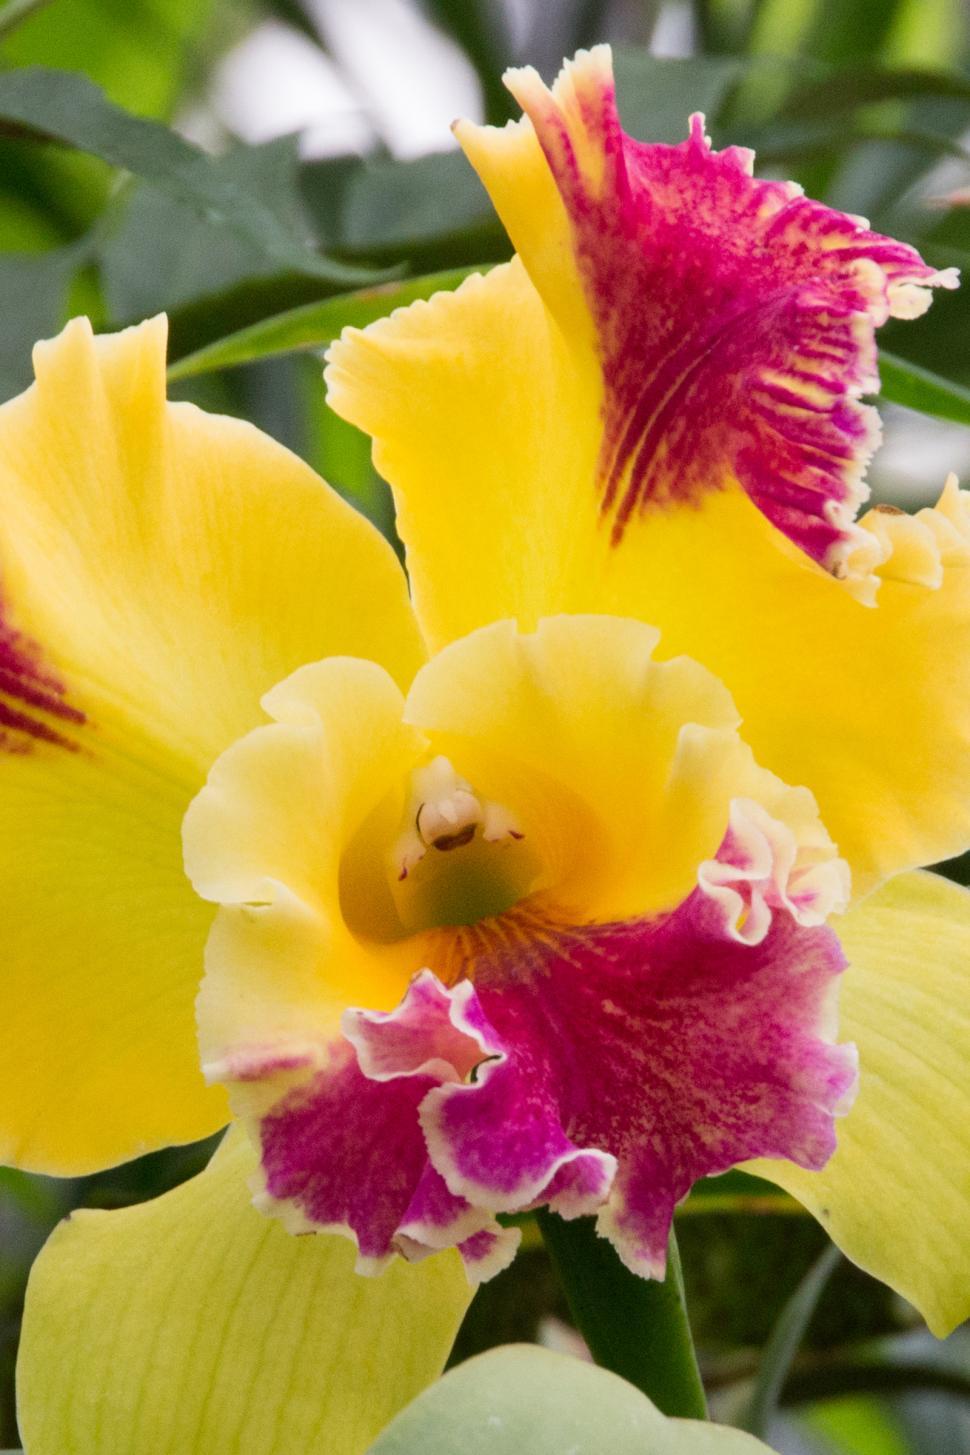 Free Image of Yellow Red Flower Cattleya Orchid Close Up 